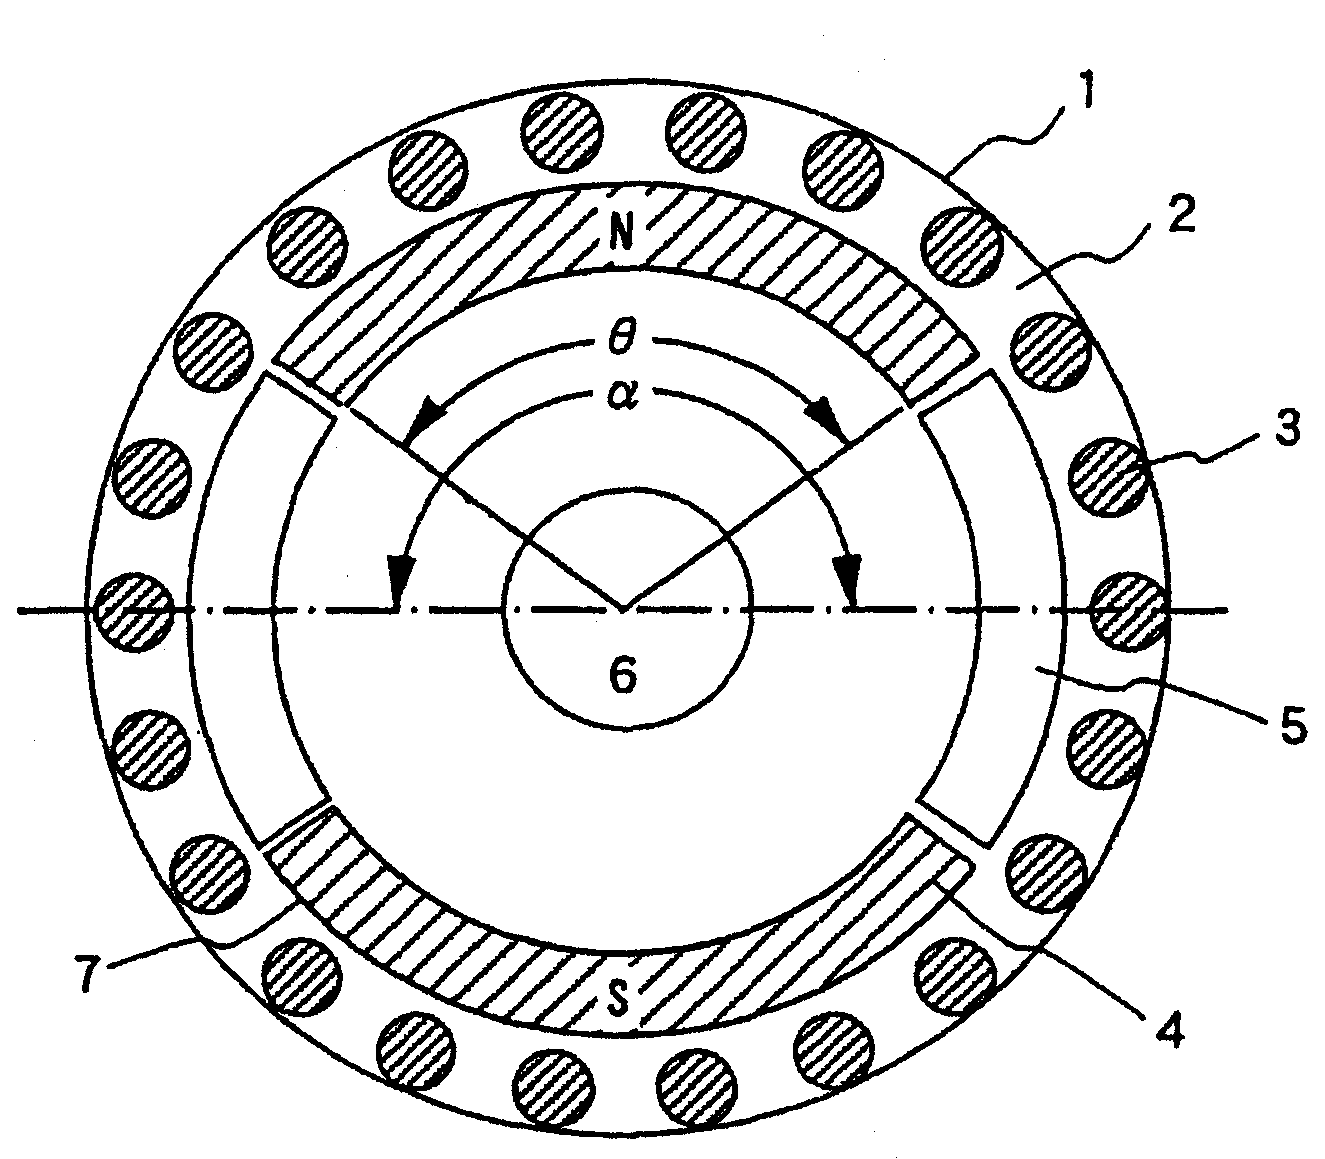 Permanent-magnet synchronous motor and compressor using this